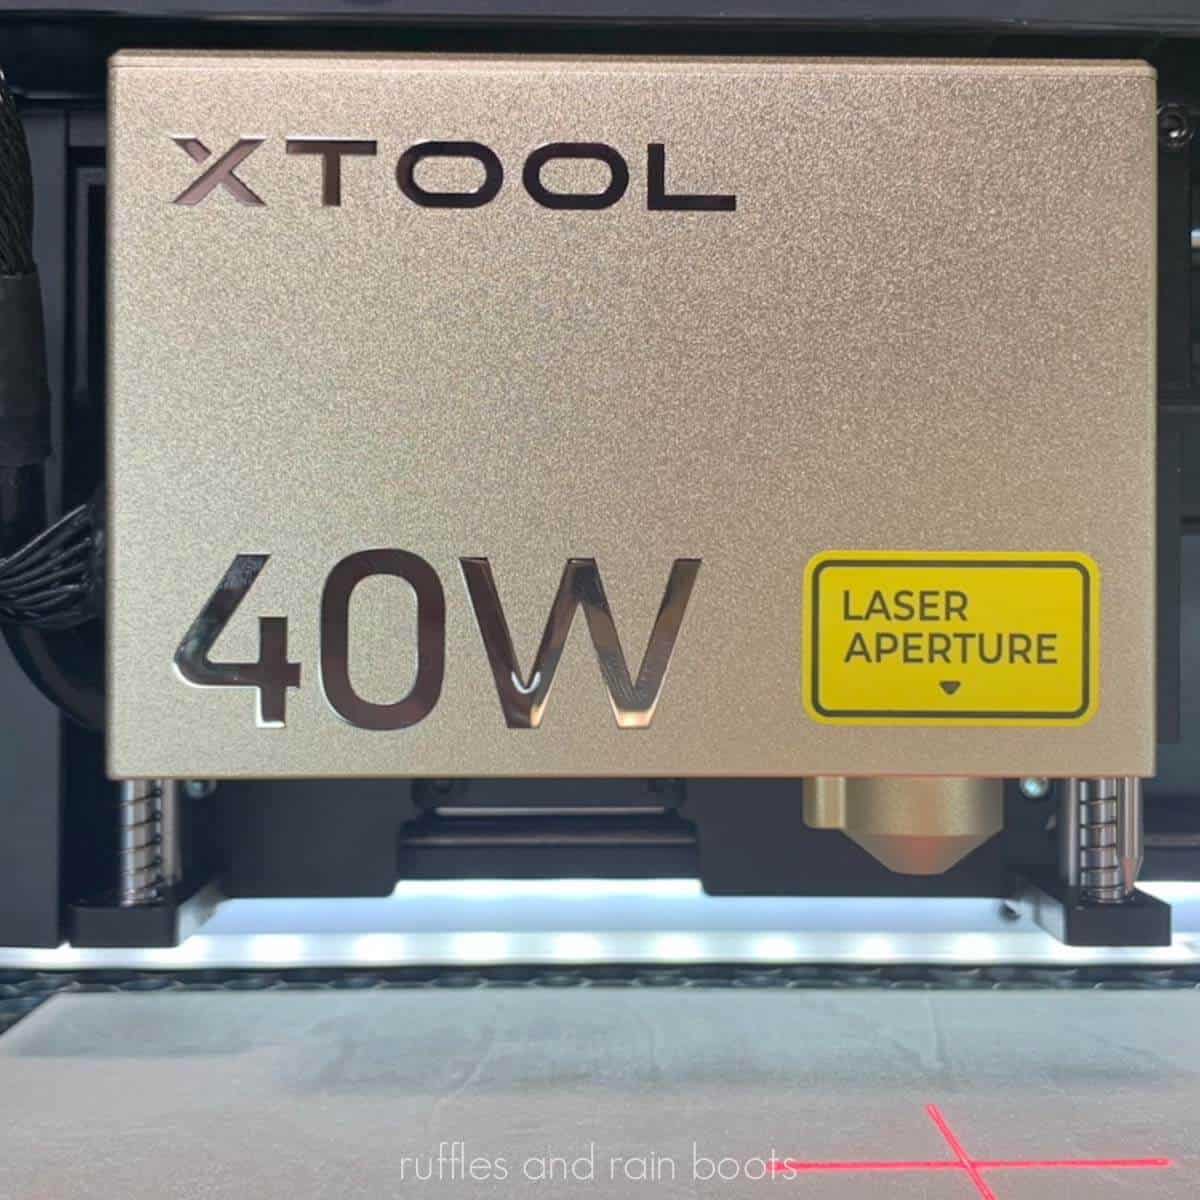 Square close up image of the xTool 40 watt laser module inside the S1.